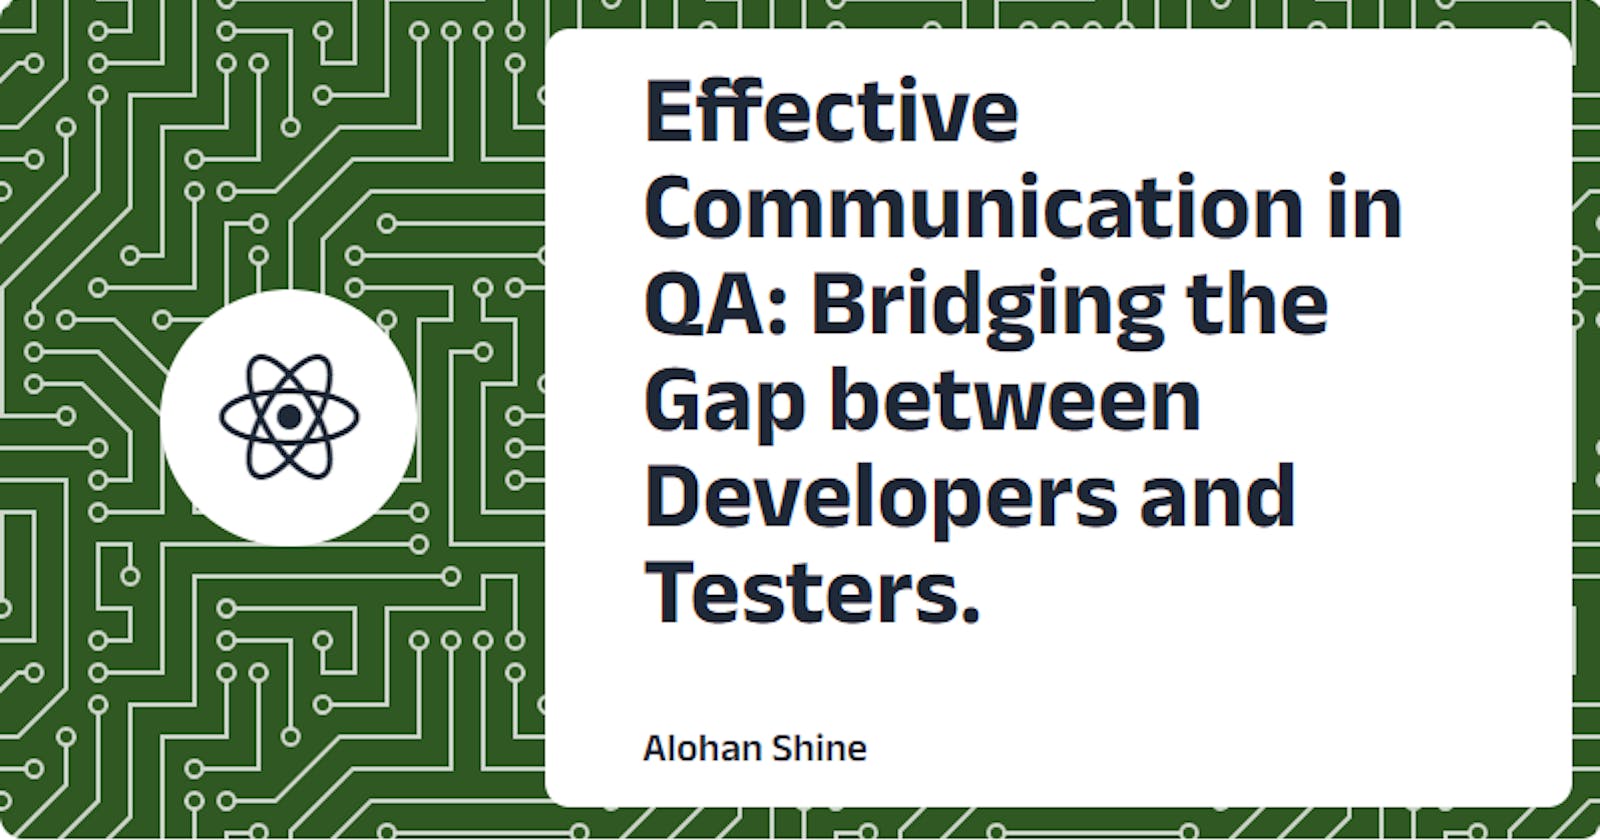 Effective Communication in QA: Bridging the Gap between Developers and Testers.